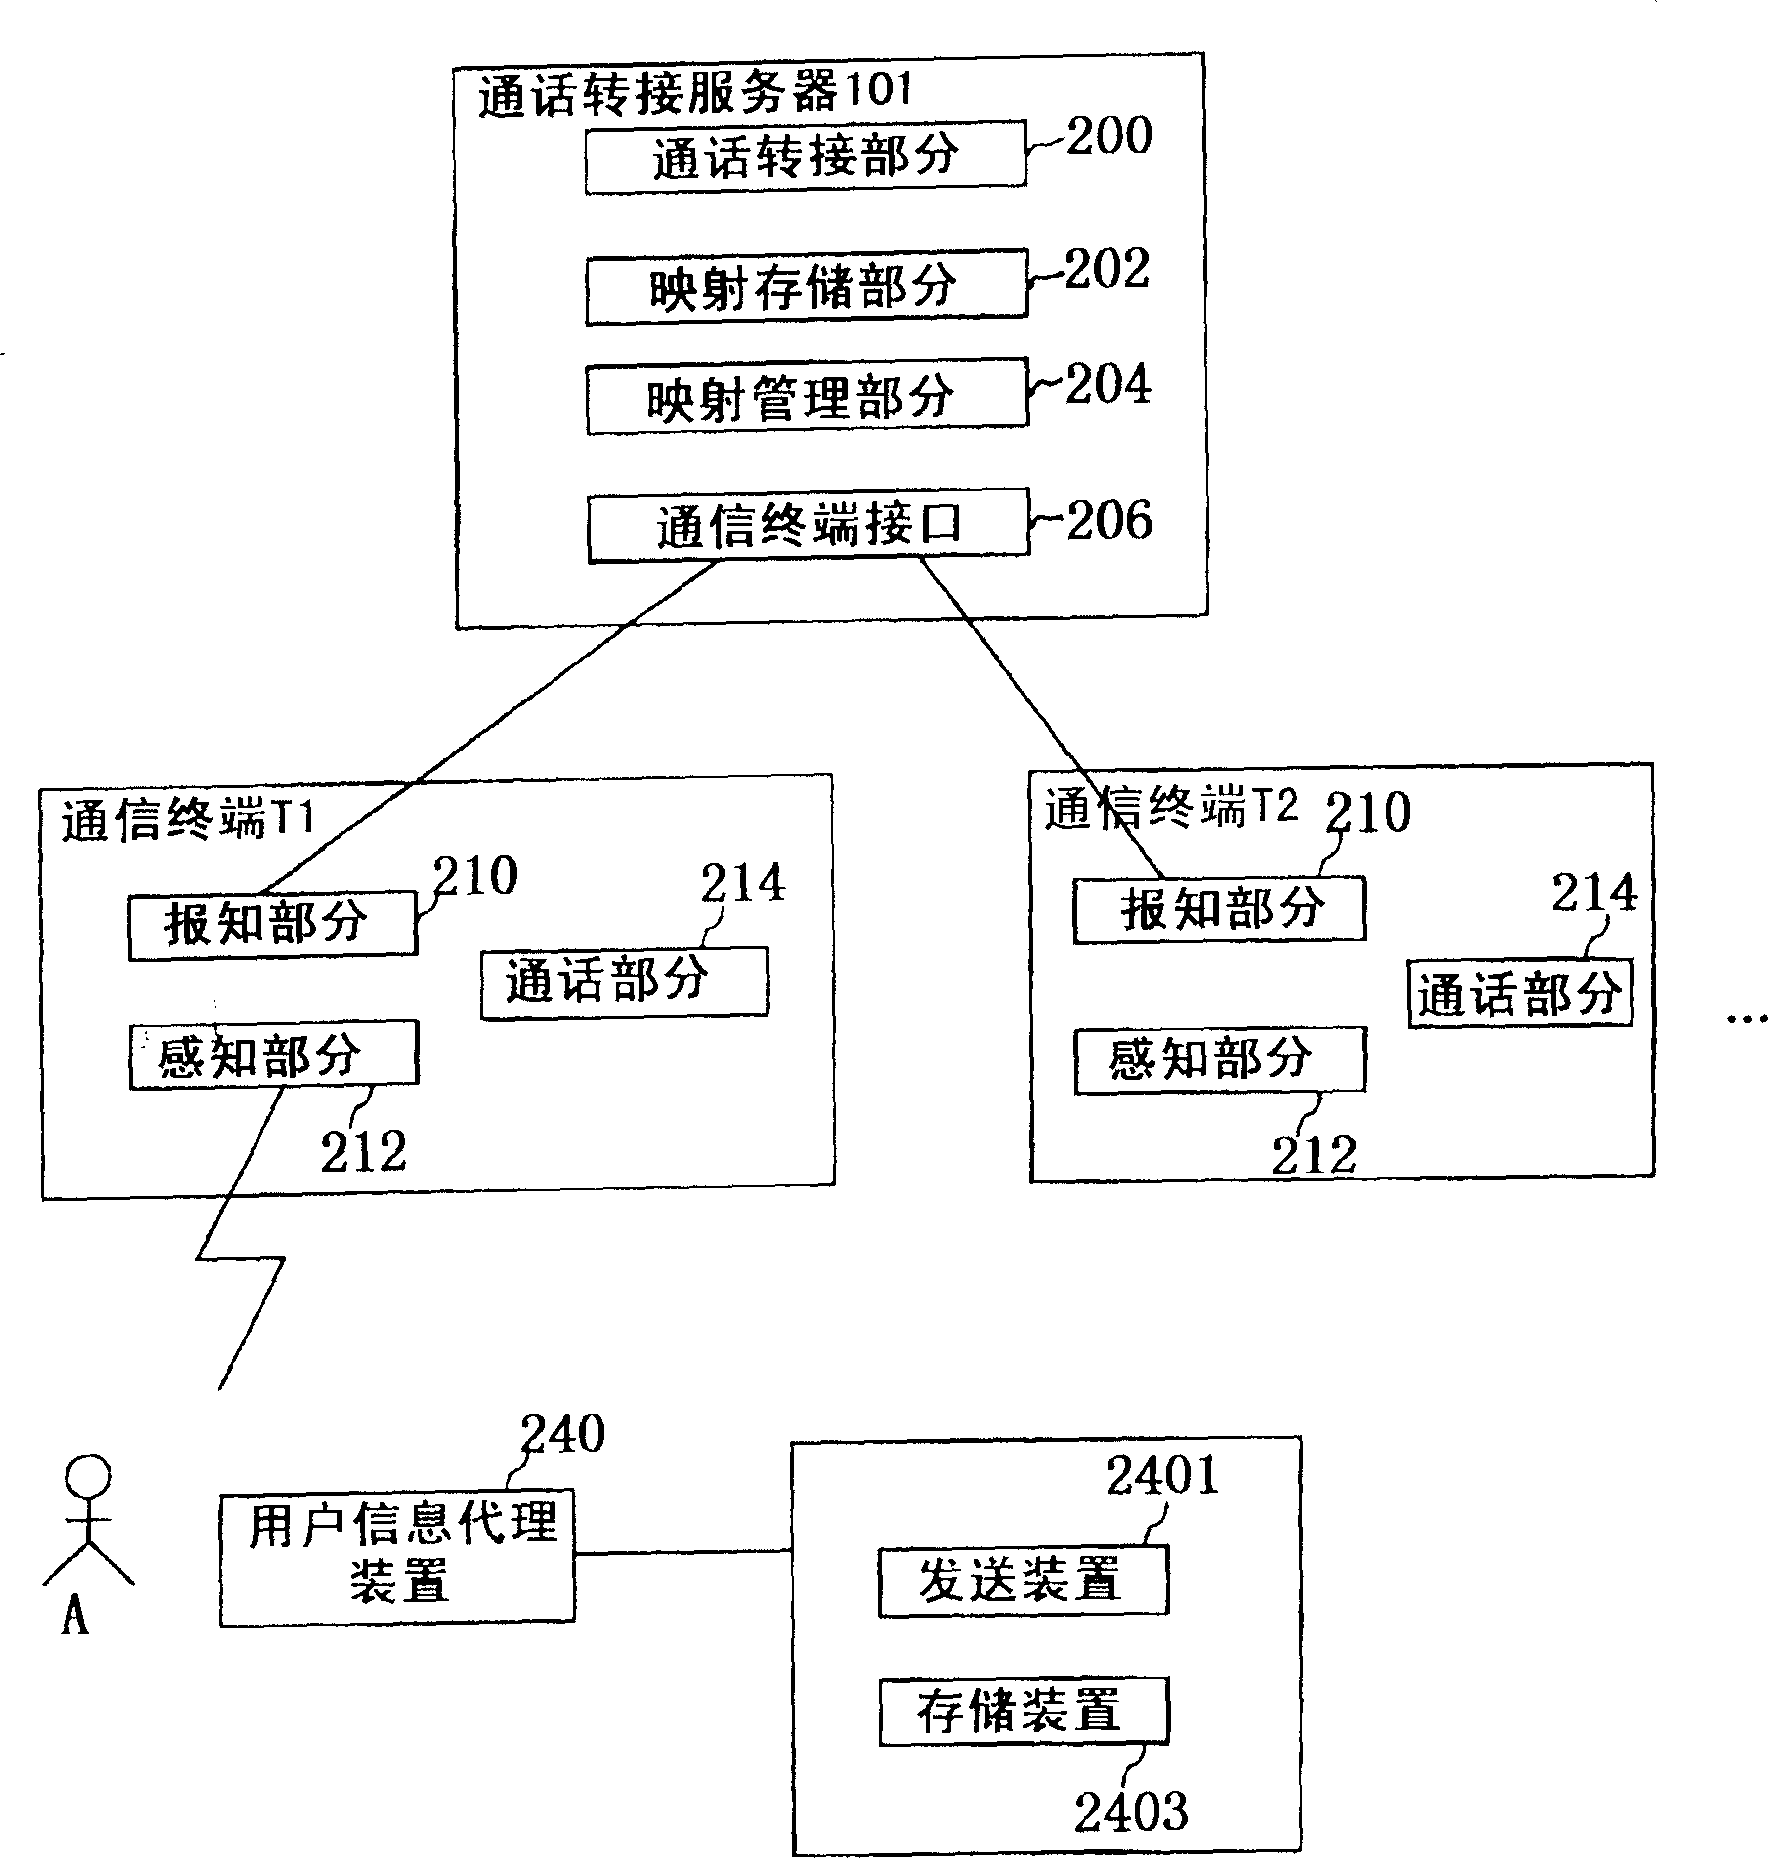 Communication terinal, call switching server, communication service providing system and method